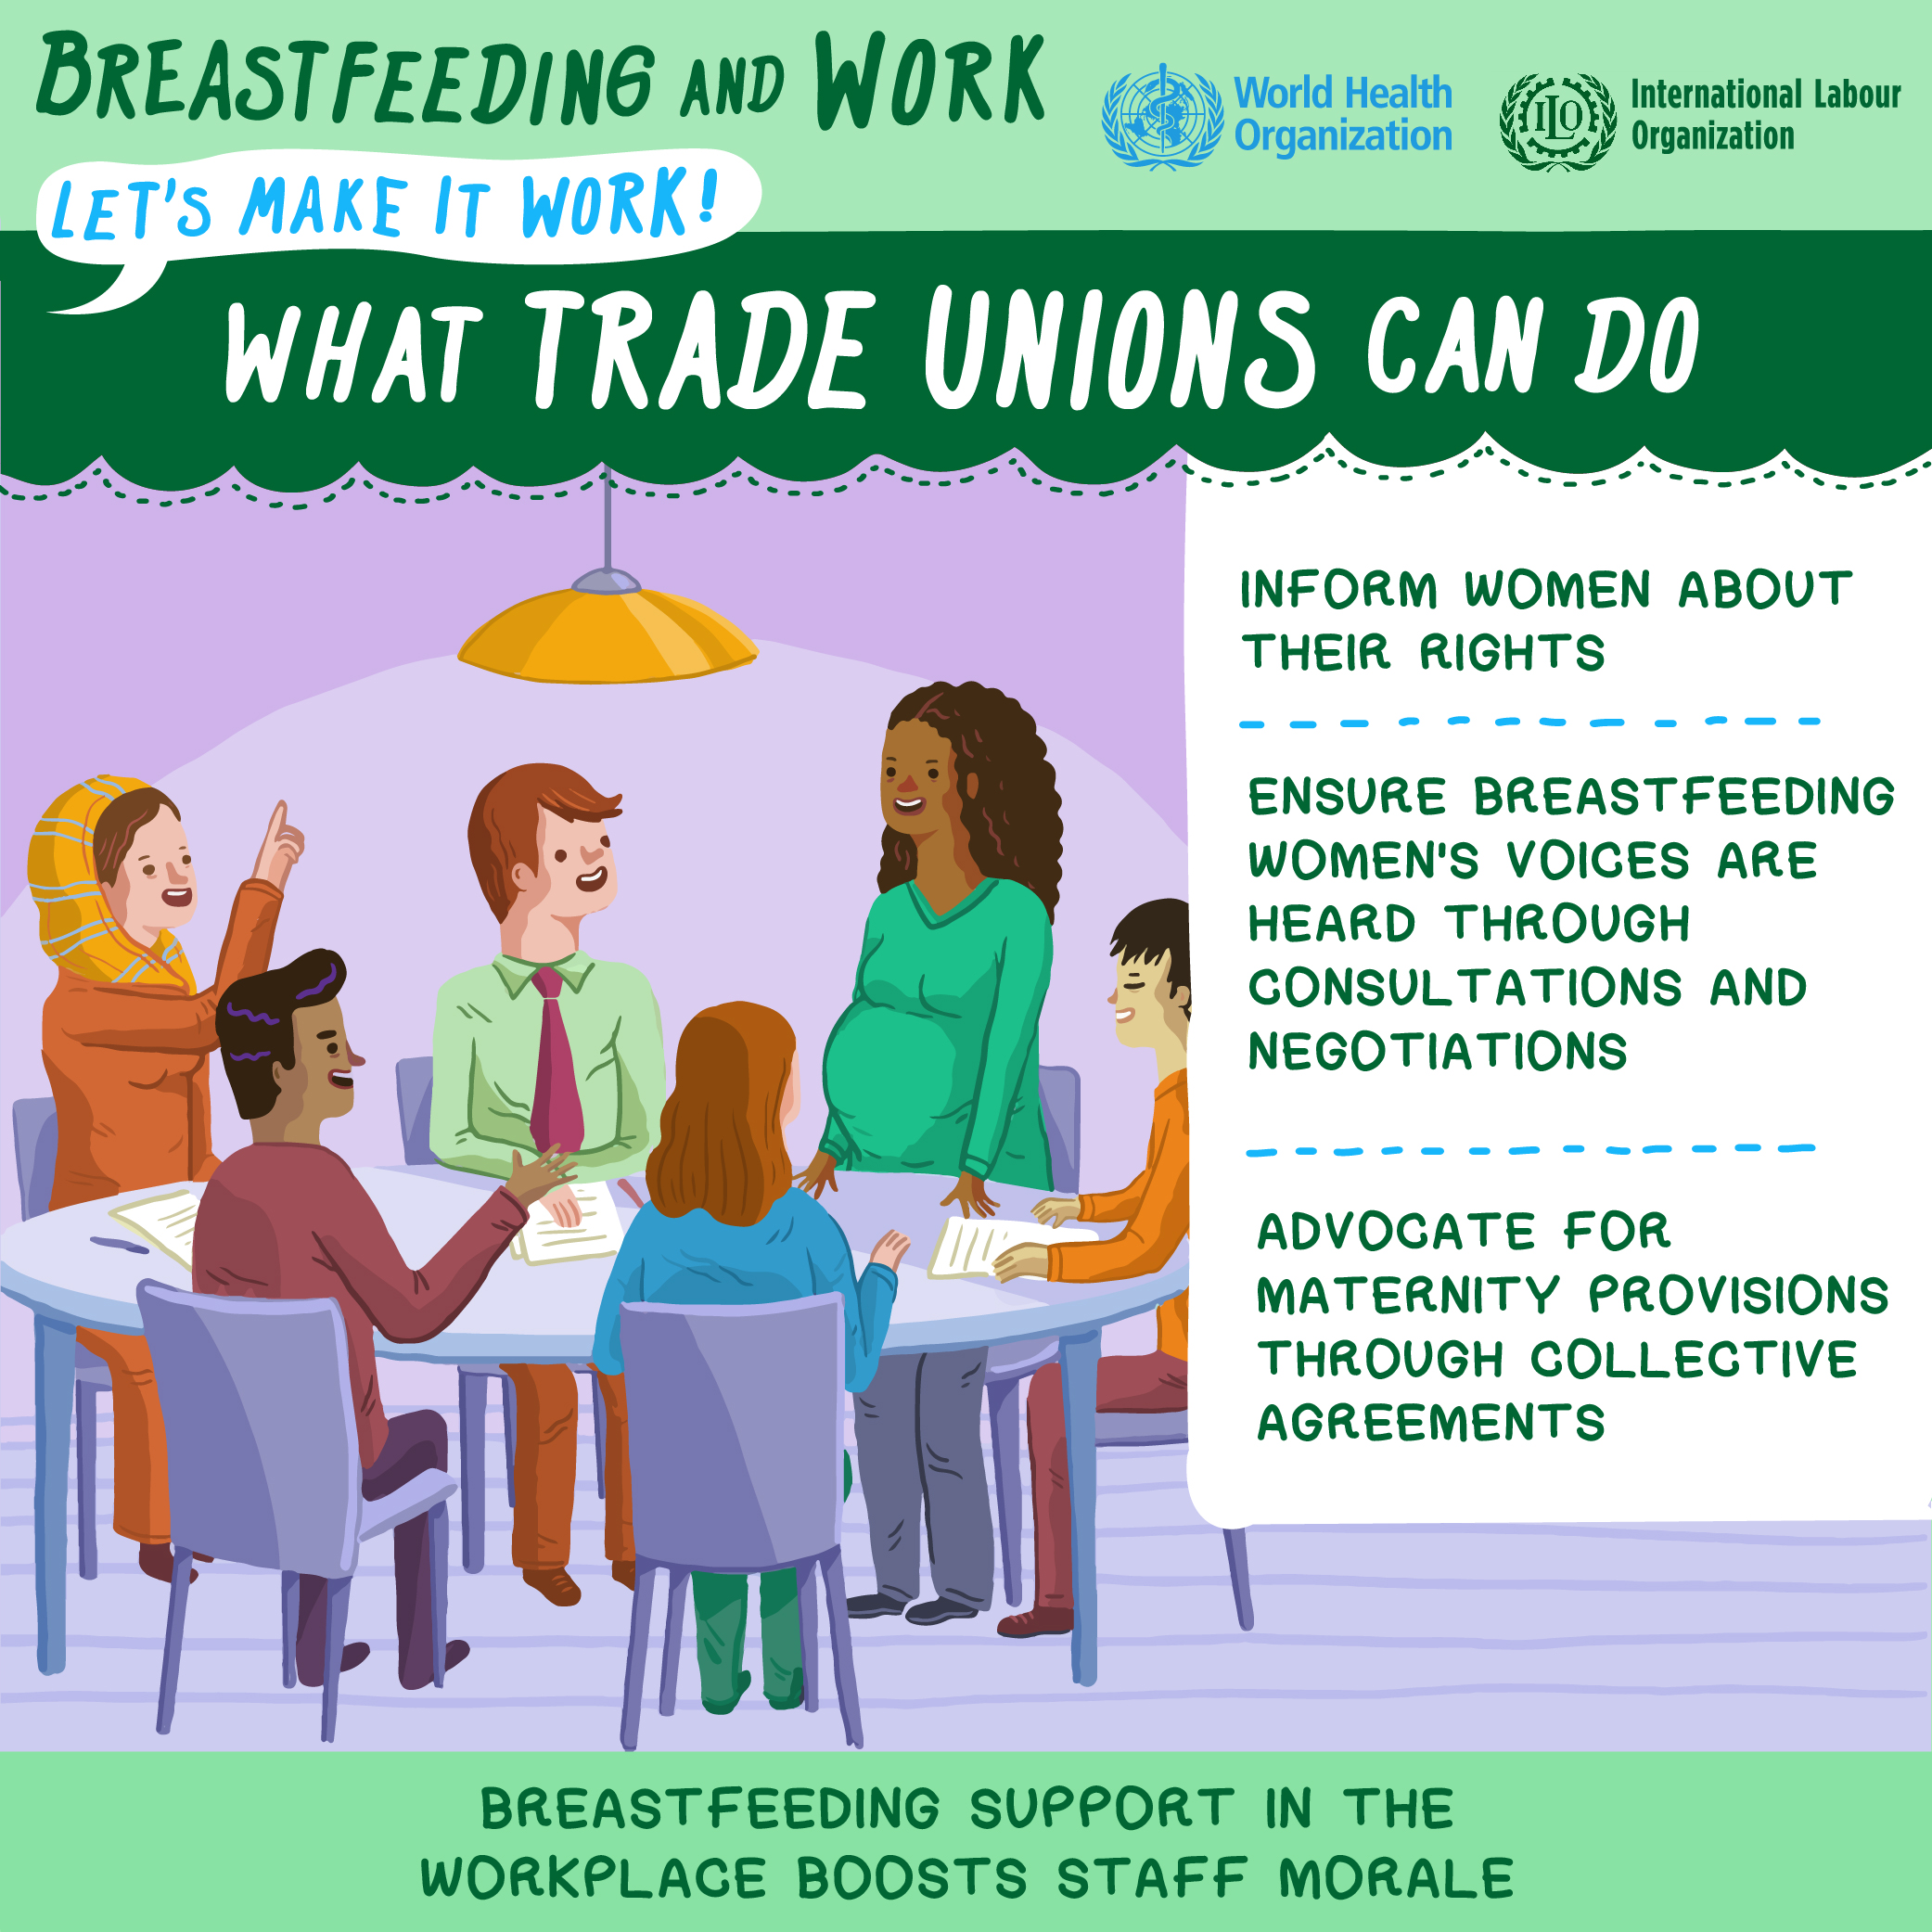 What trade unions can do